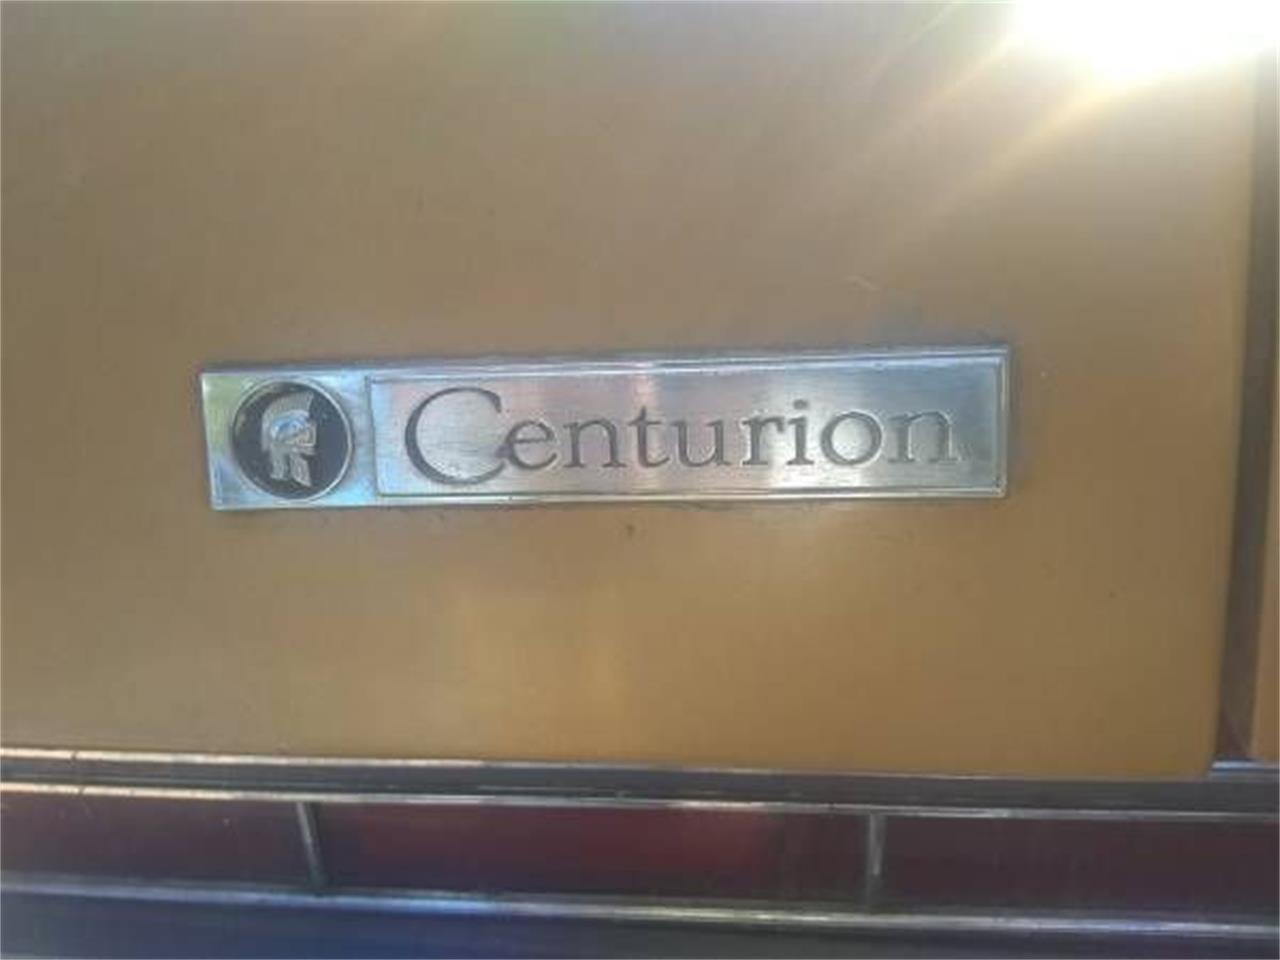 1971 Buick Centurion for sale in Cadillac, MI – photo 8